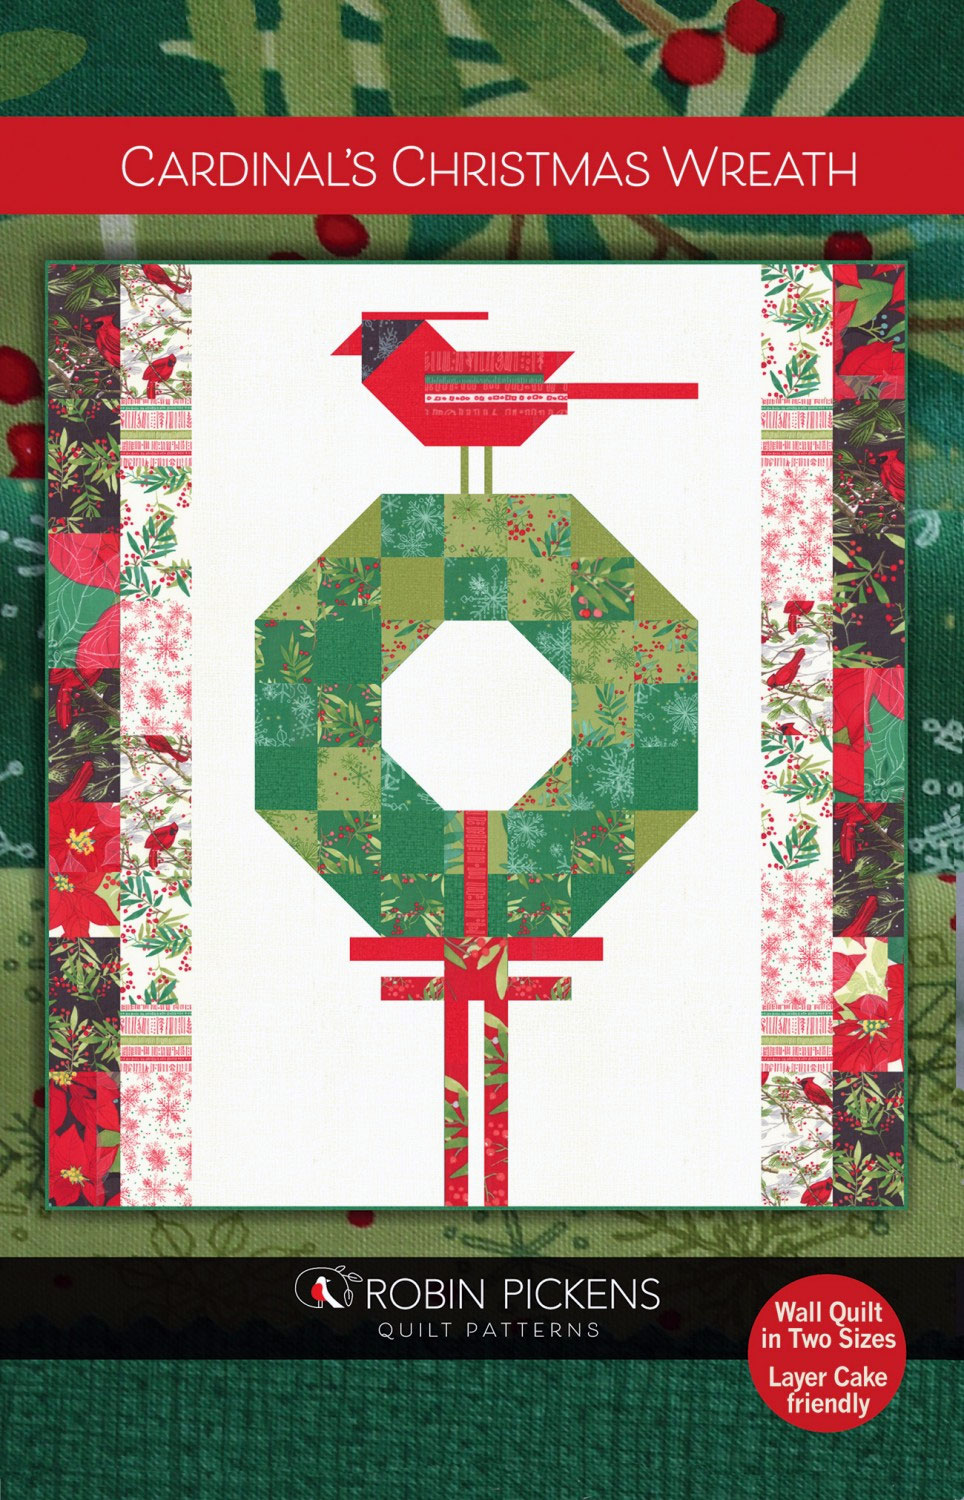 Cardinals-Christmas-Wreath-quilt-sewing-pattern-color-and-quilt-front